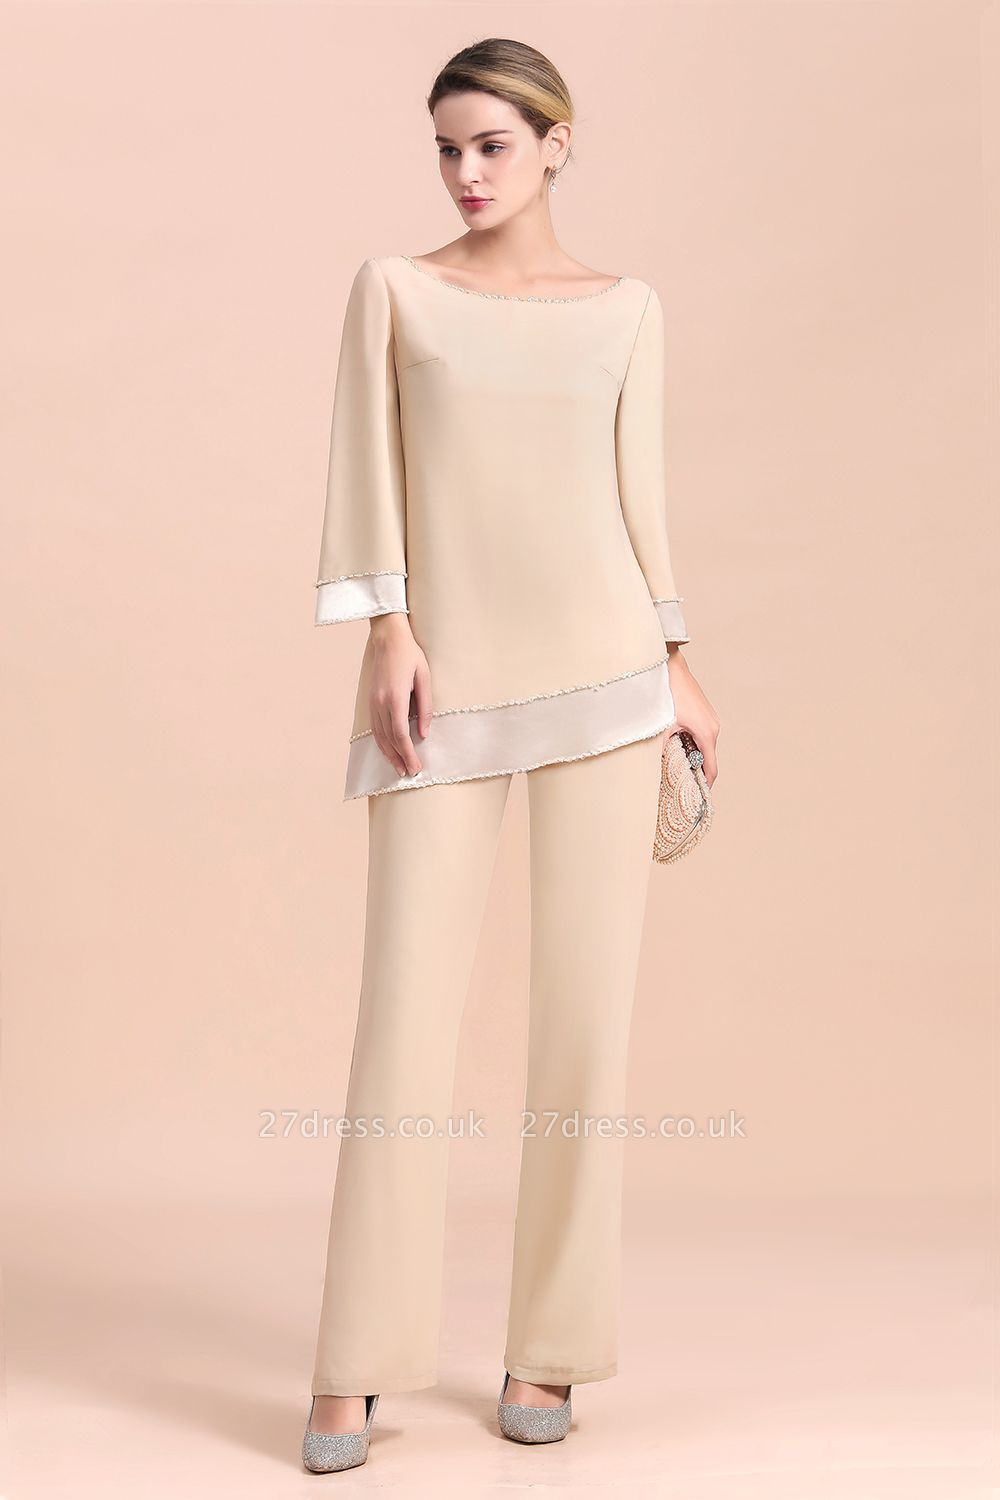 Round-Neck Champagne Chiffon Mother of Bride Jumpsuit for Wedding Guest